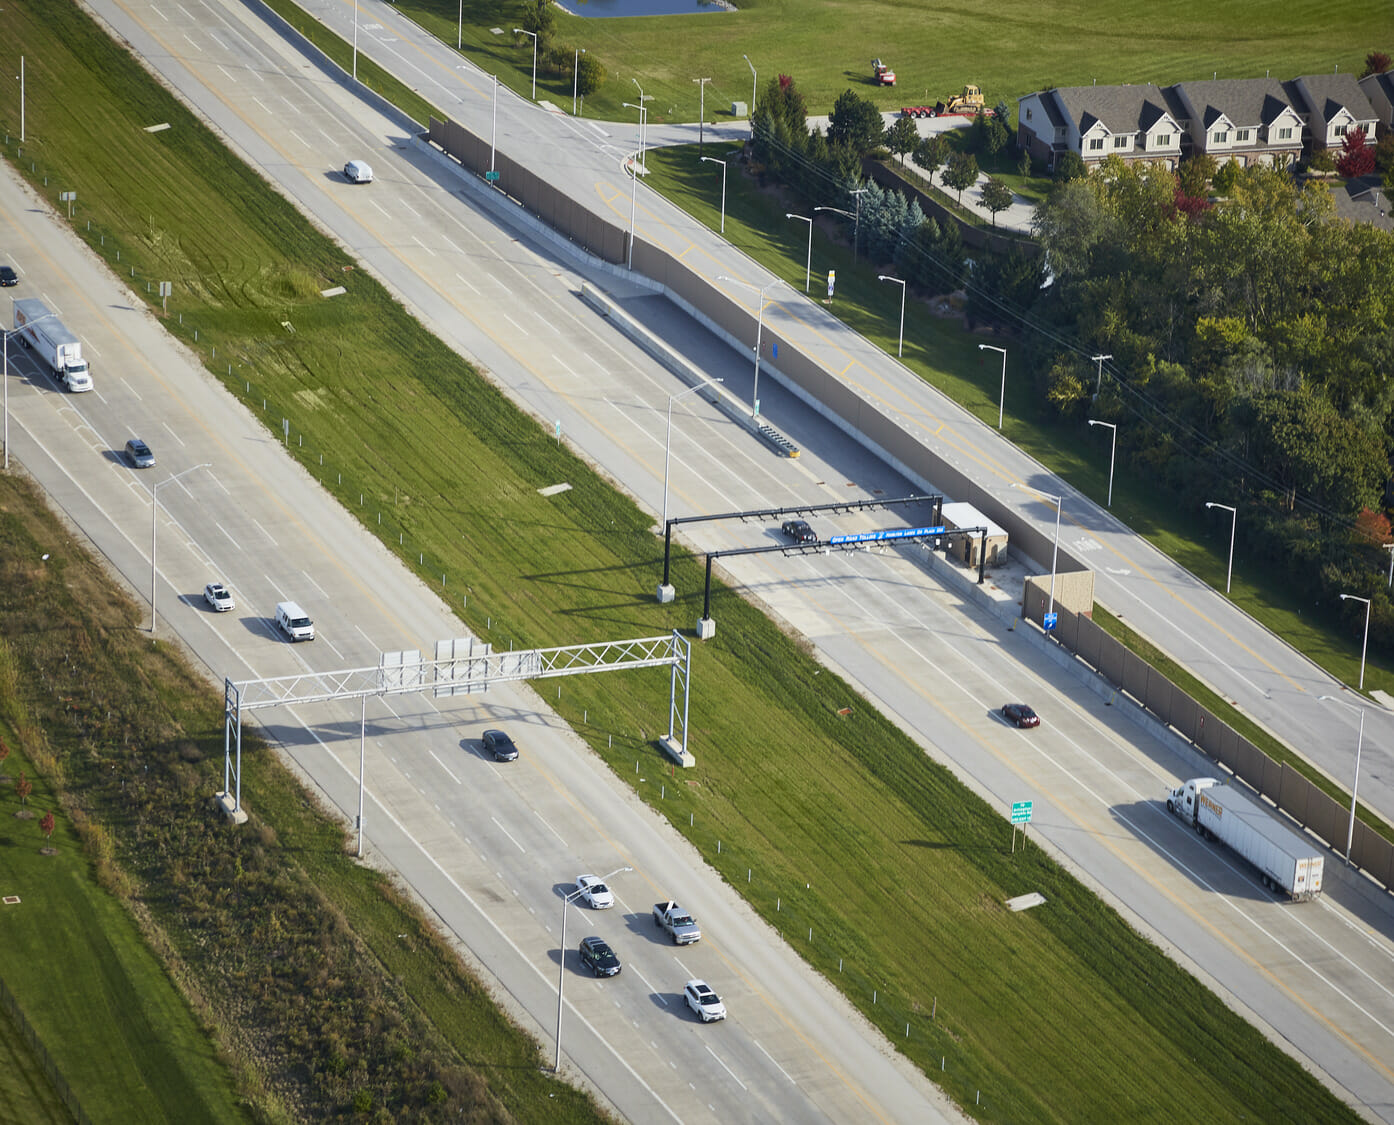 An aerial view of a highway with cars driving on it.